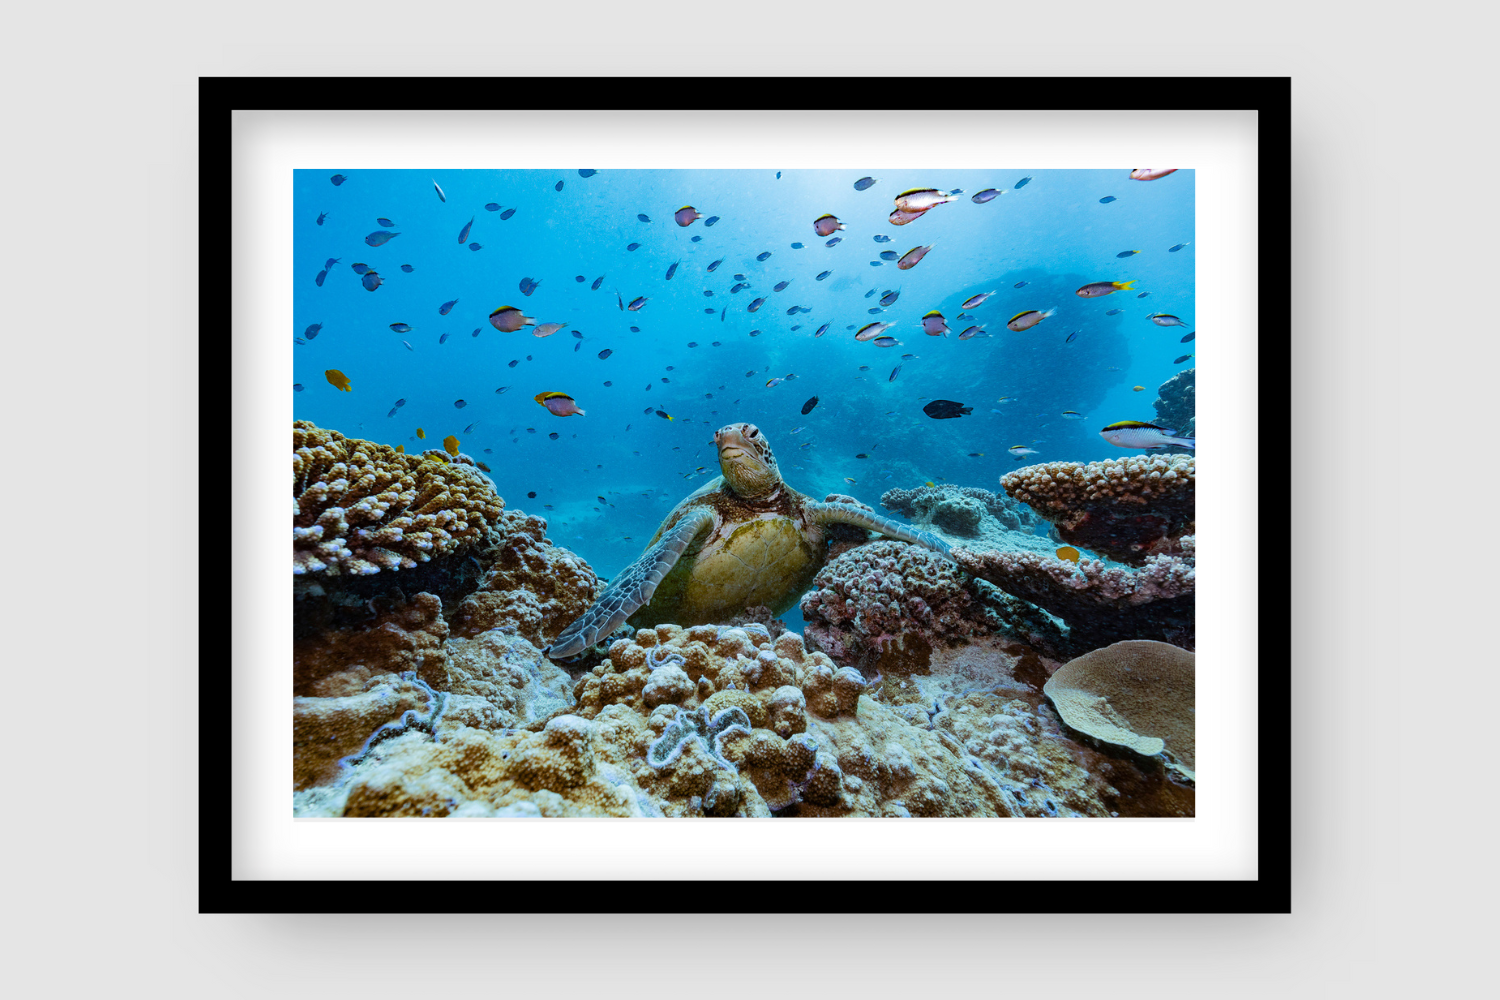 sea turtle popping up over a wall of coral reef as smaller fish swim behind him